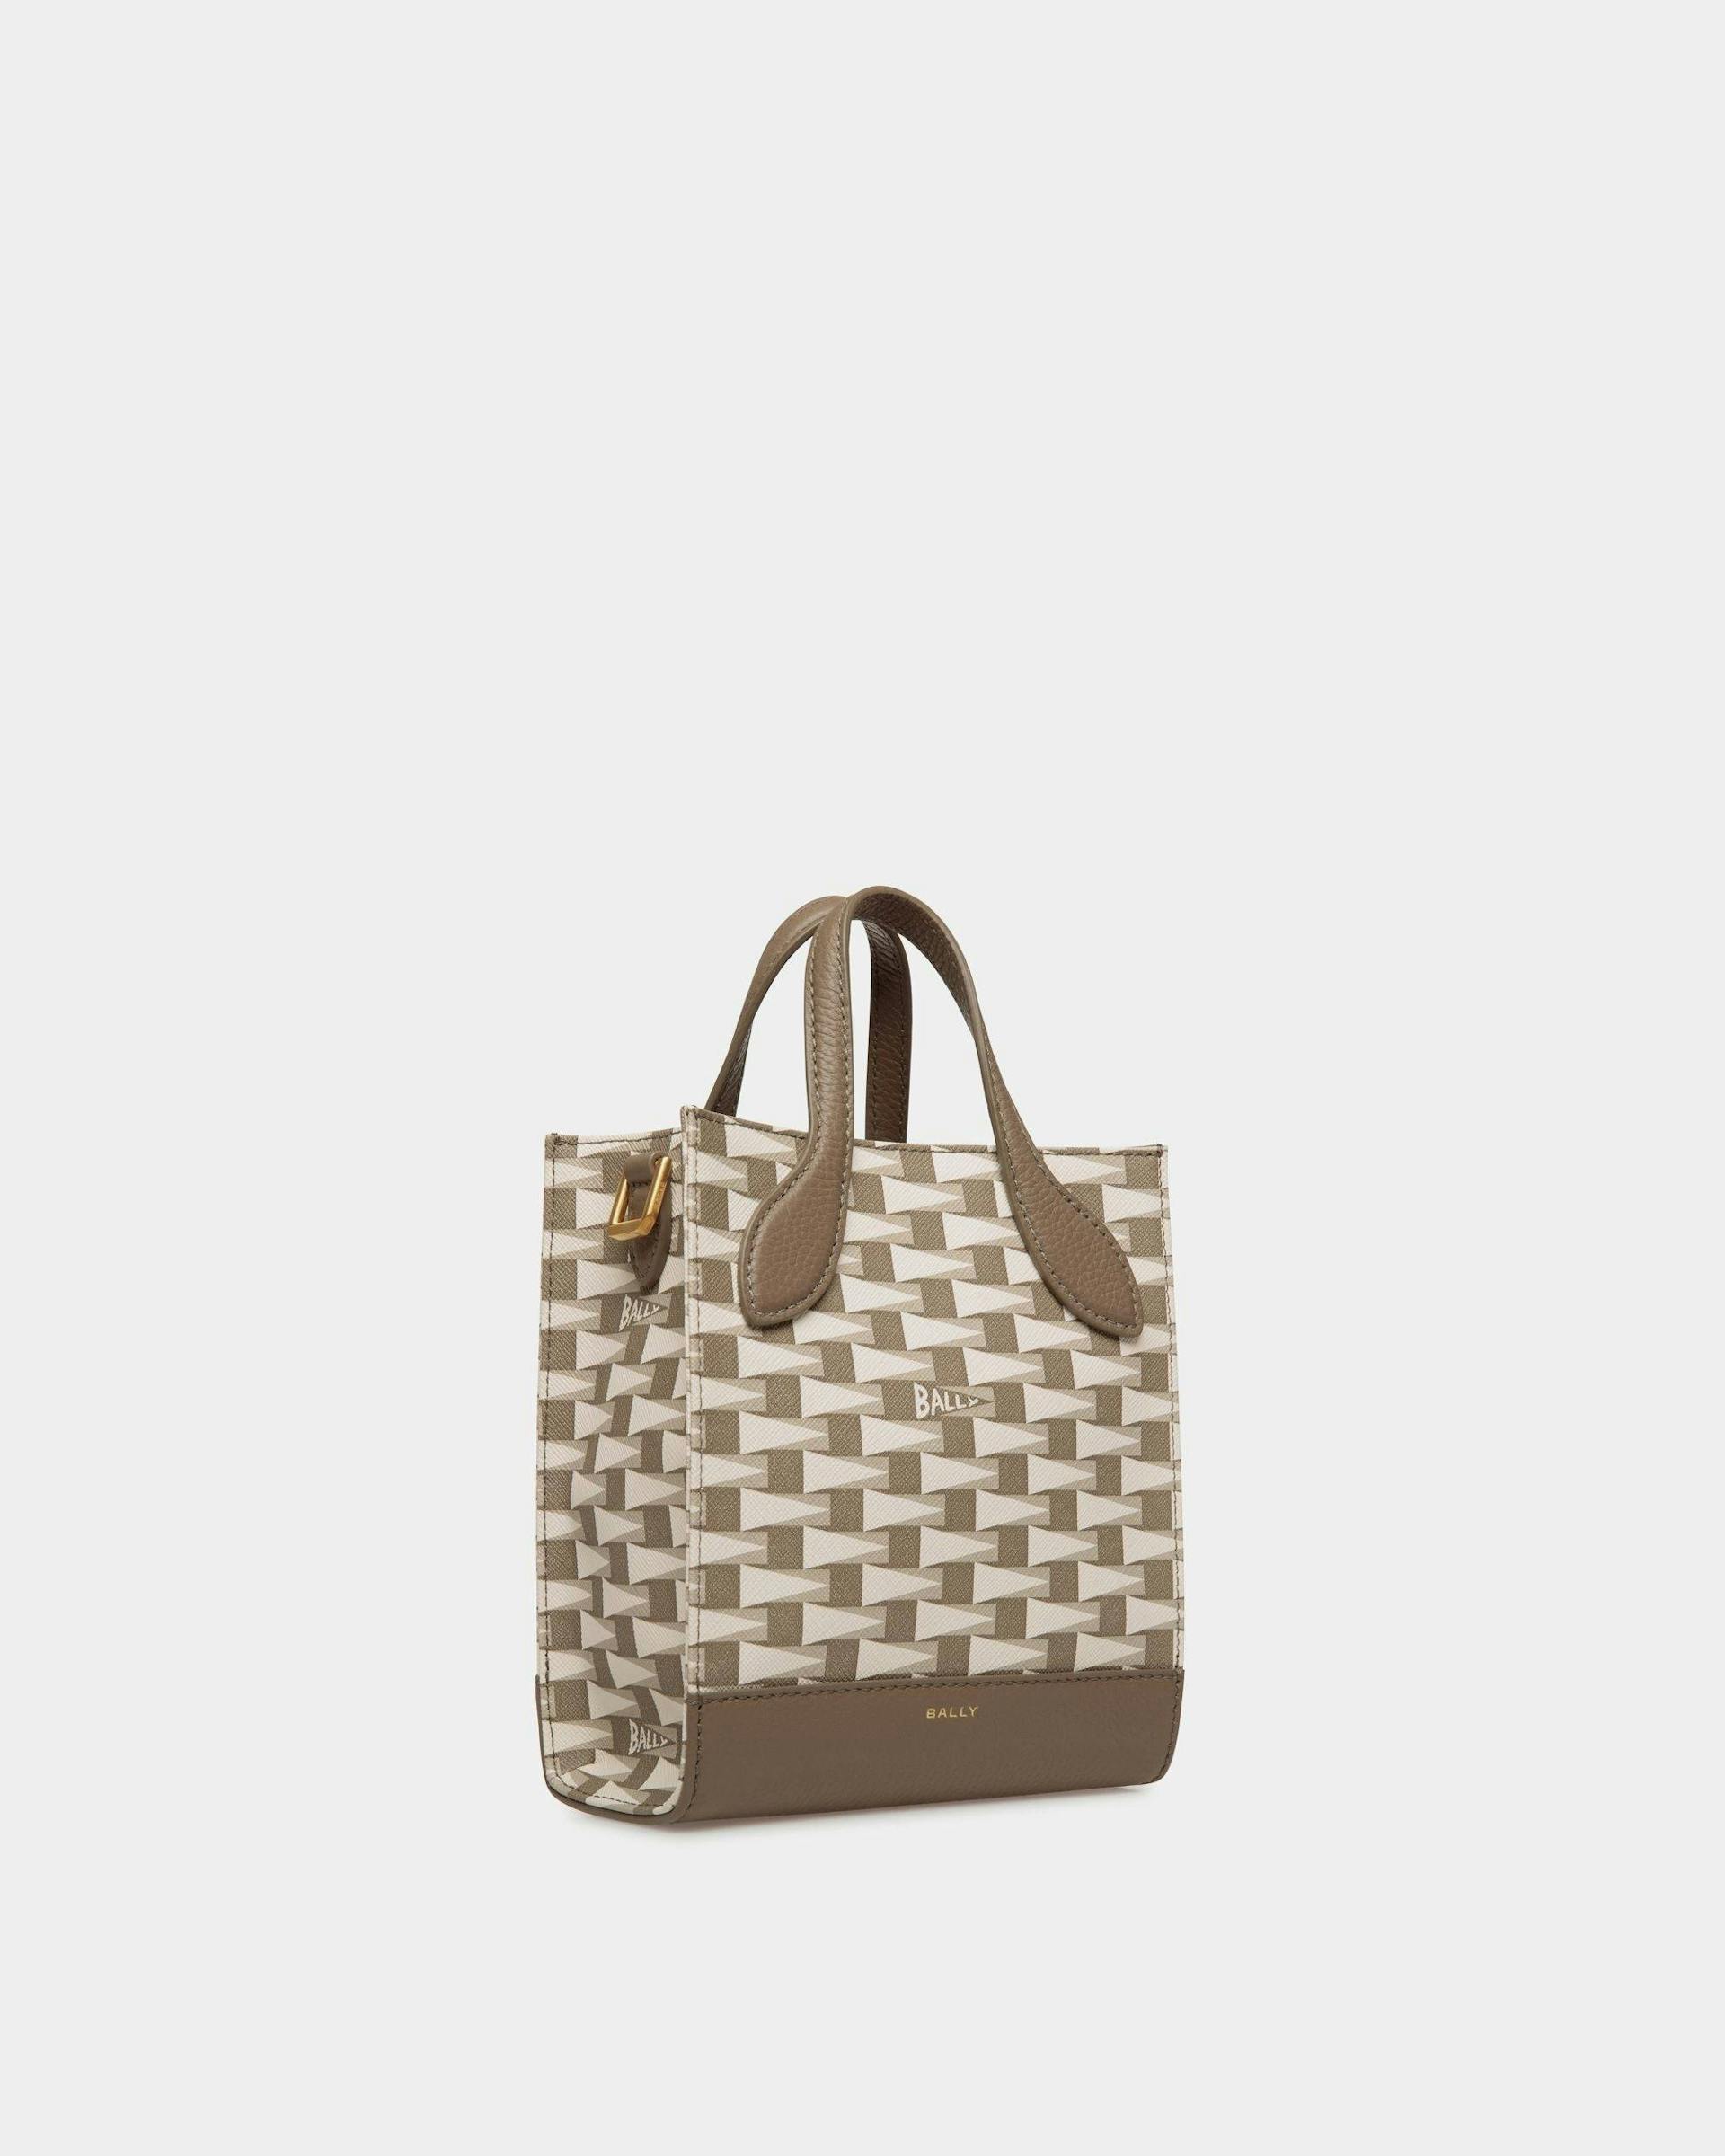 Women's Pennant Mini Tote Bag in Beige TPU | Bally | Still Life 3/4 Front